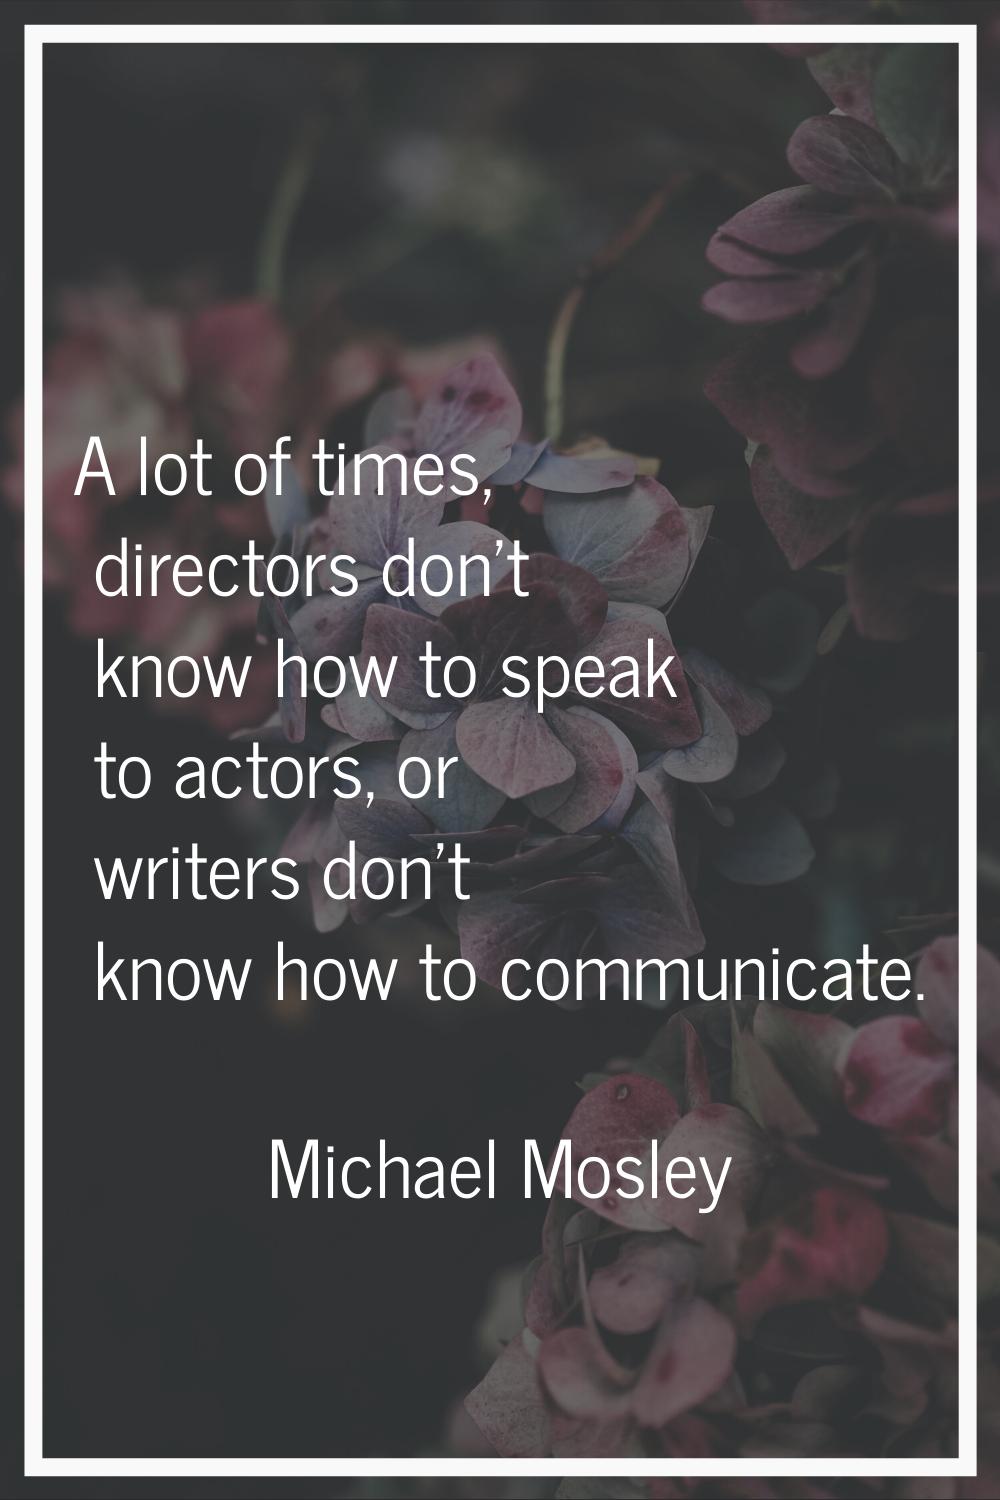 A lot of times, directors don't know how to speak to actors, or writers don't know how to communica